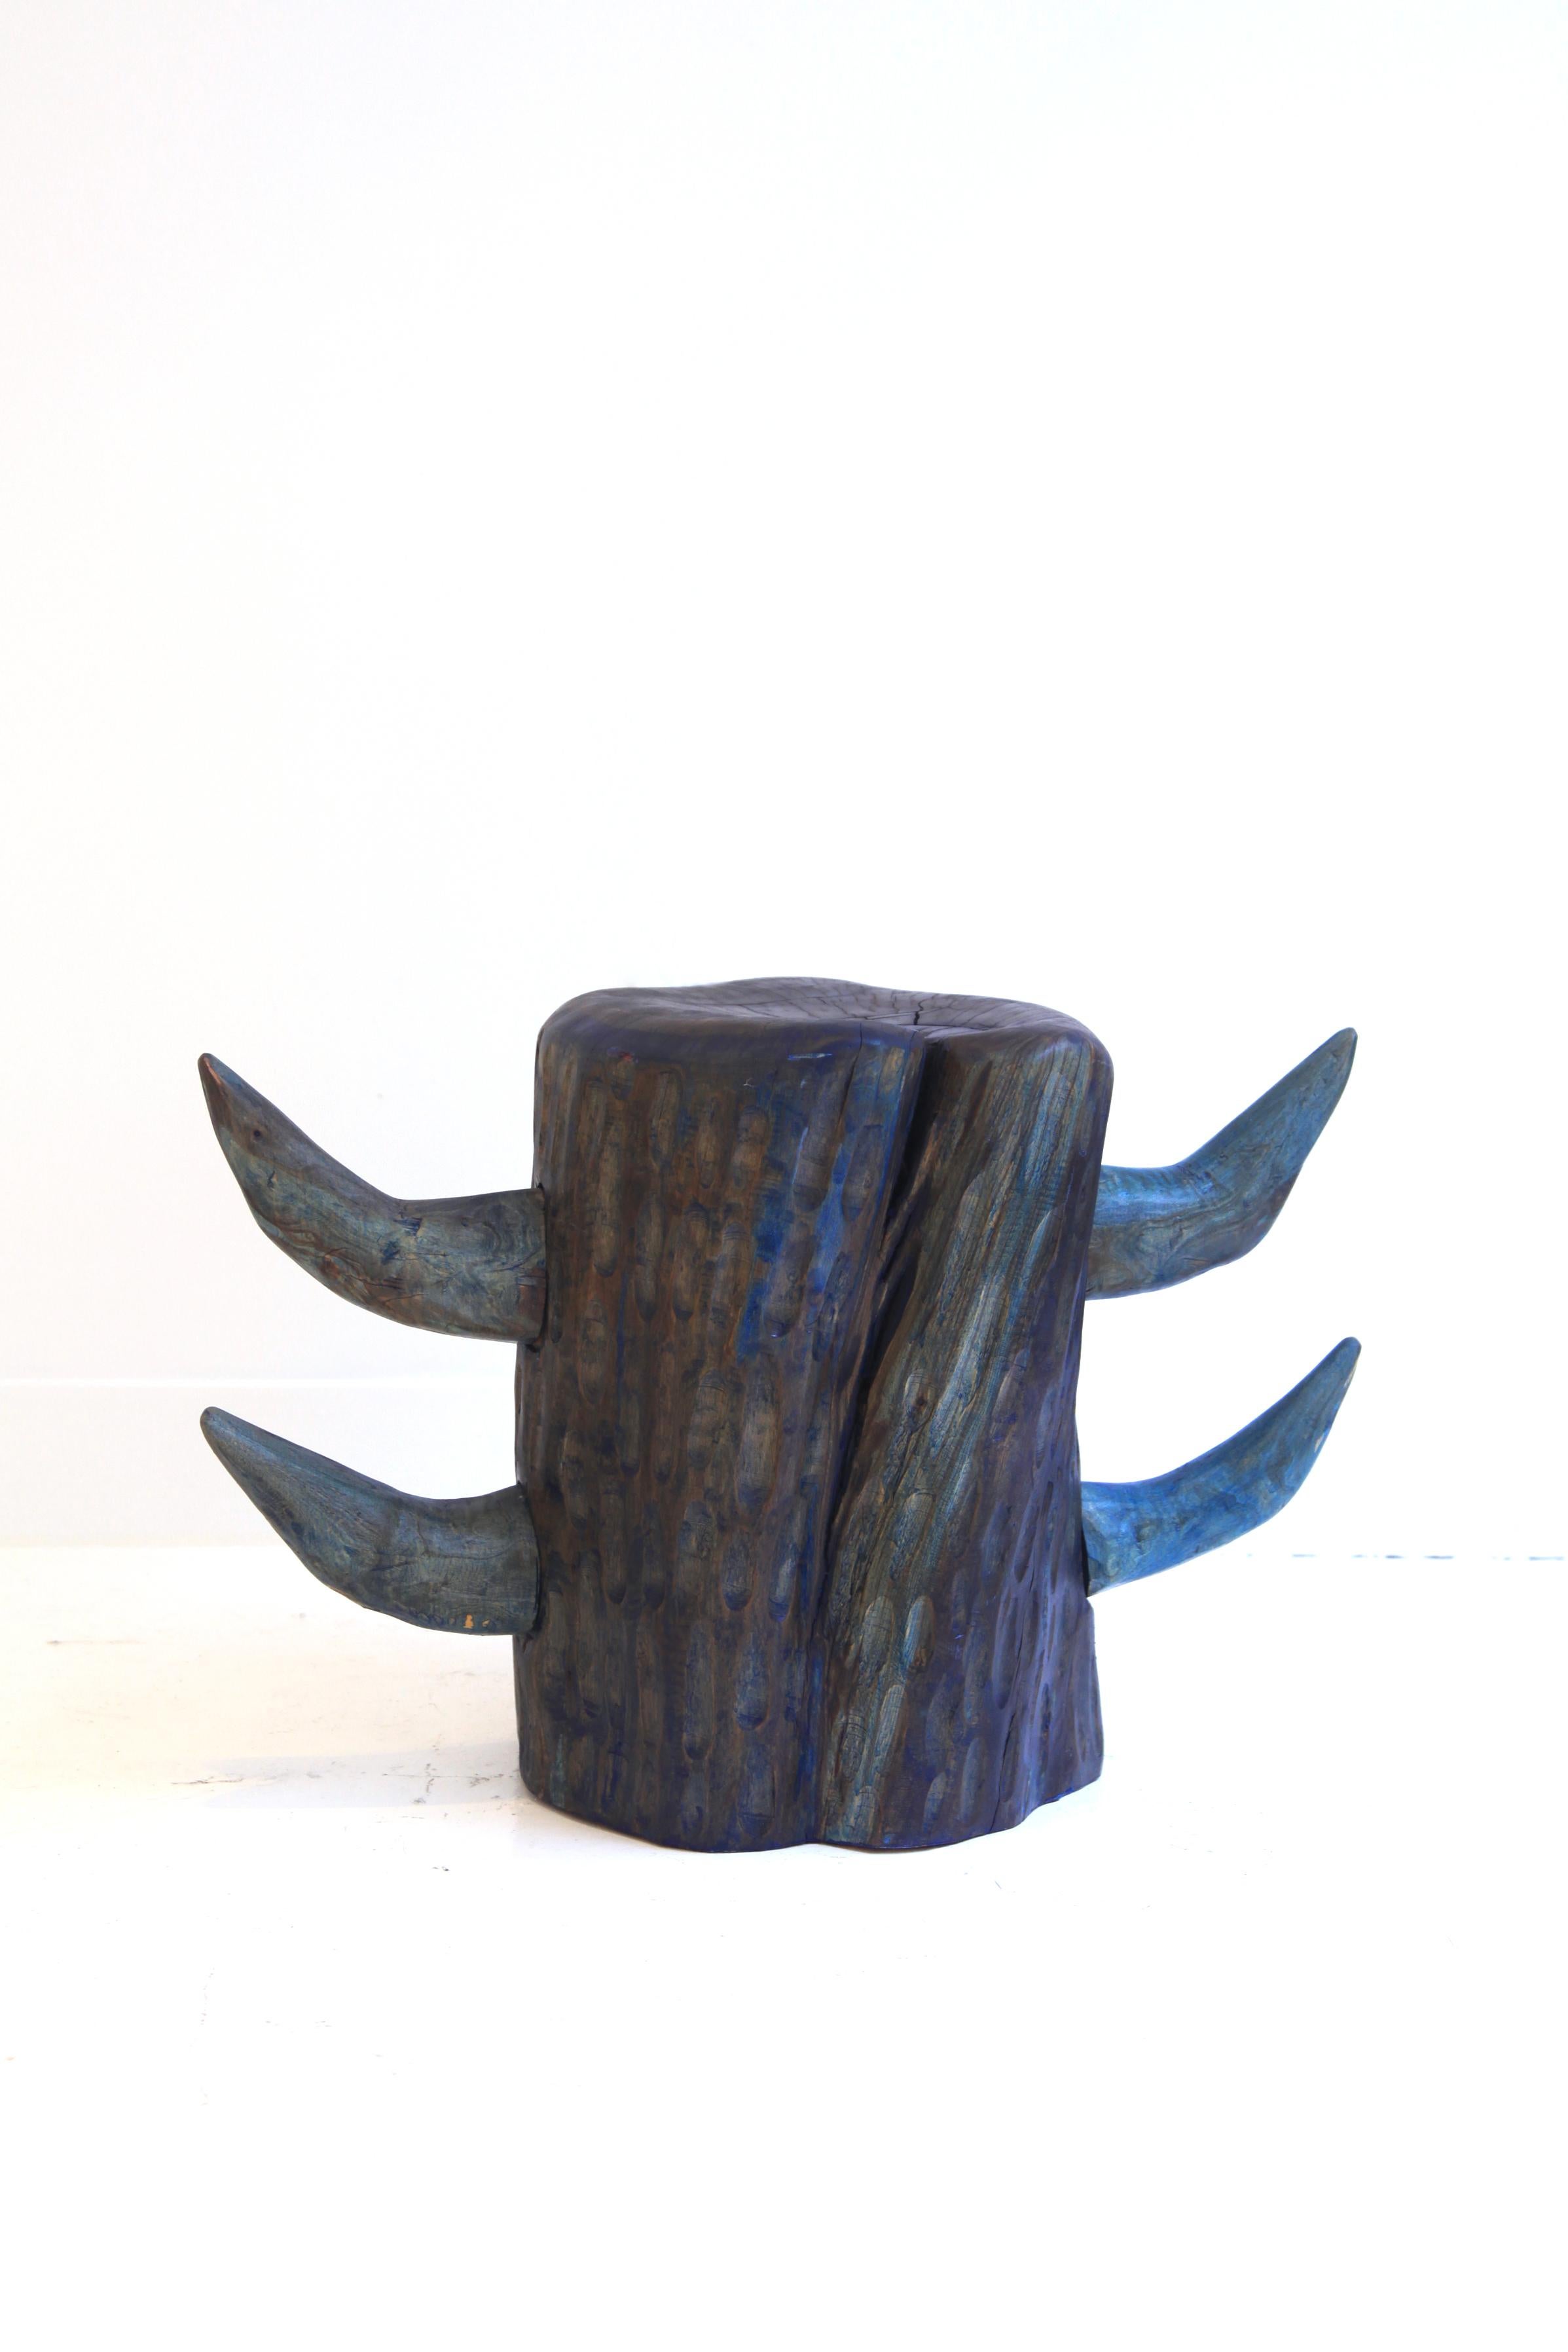 Unique olive wood stool by BehaghelFoiny
Unique 
From the series 